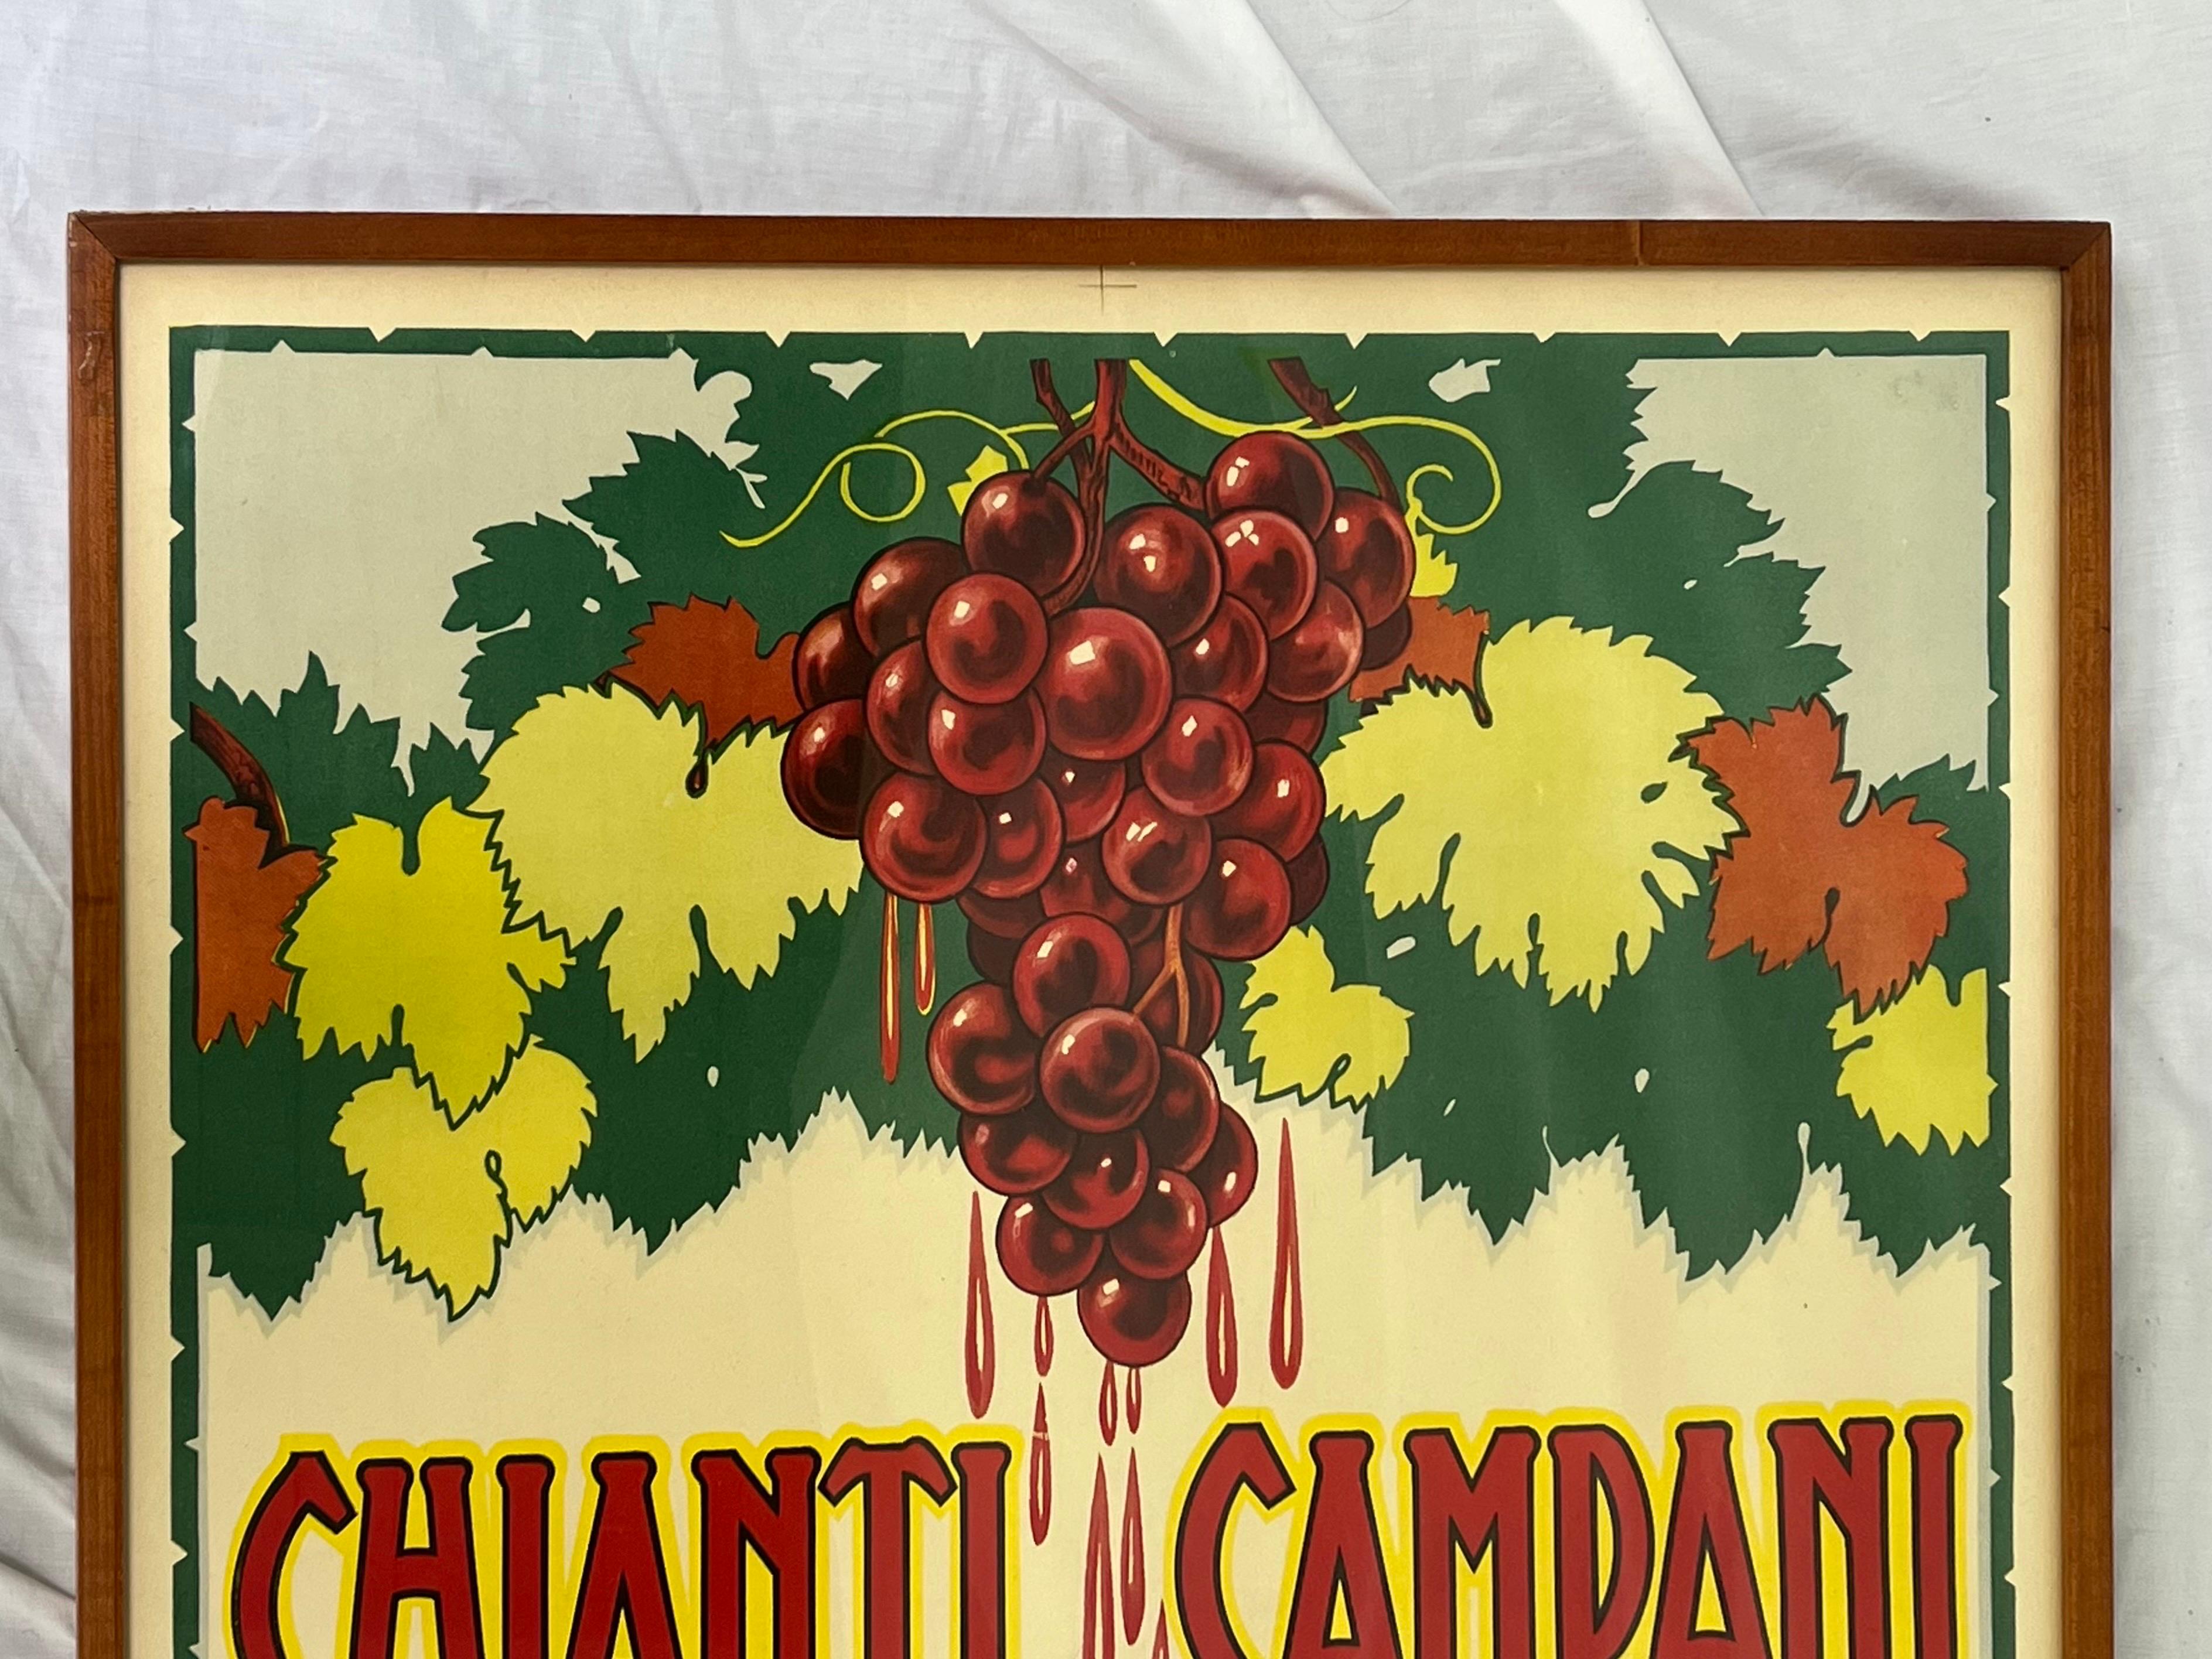 An original, vintage, mid century Italian poster for Chianti Campani featuring a gnome imbibing the juicy wine fresh from the Sangiovese grapes above his head. Oh those mischevious gnomes! While I don't have any fava beans to accompany this Chianti,